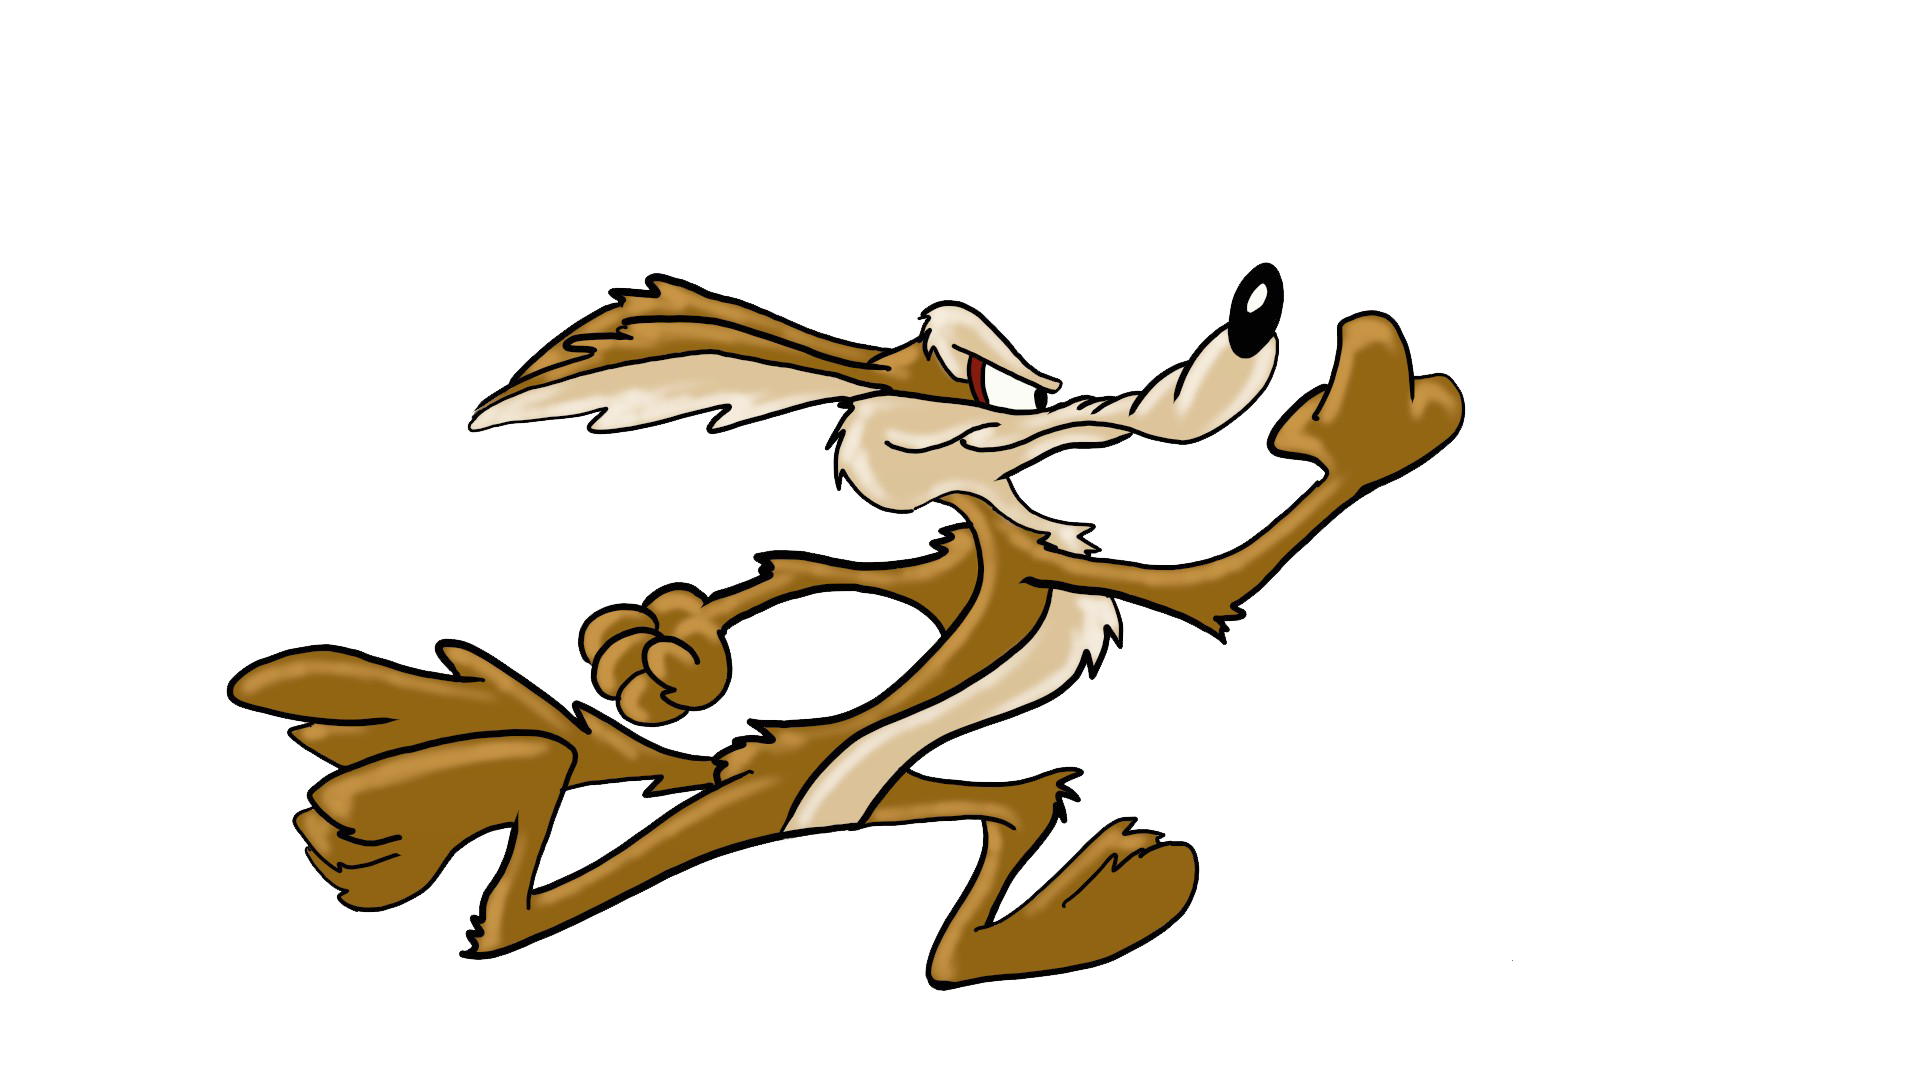 Wile E Coyote PNG Images Transparent Background | PNG Play